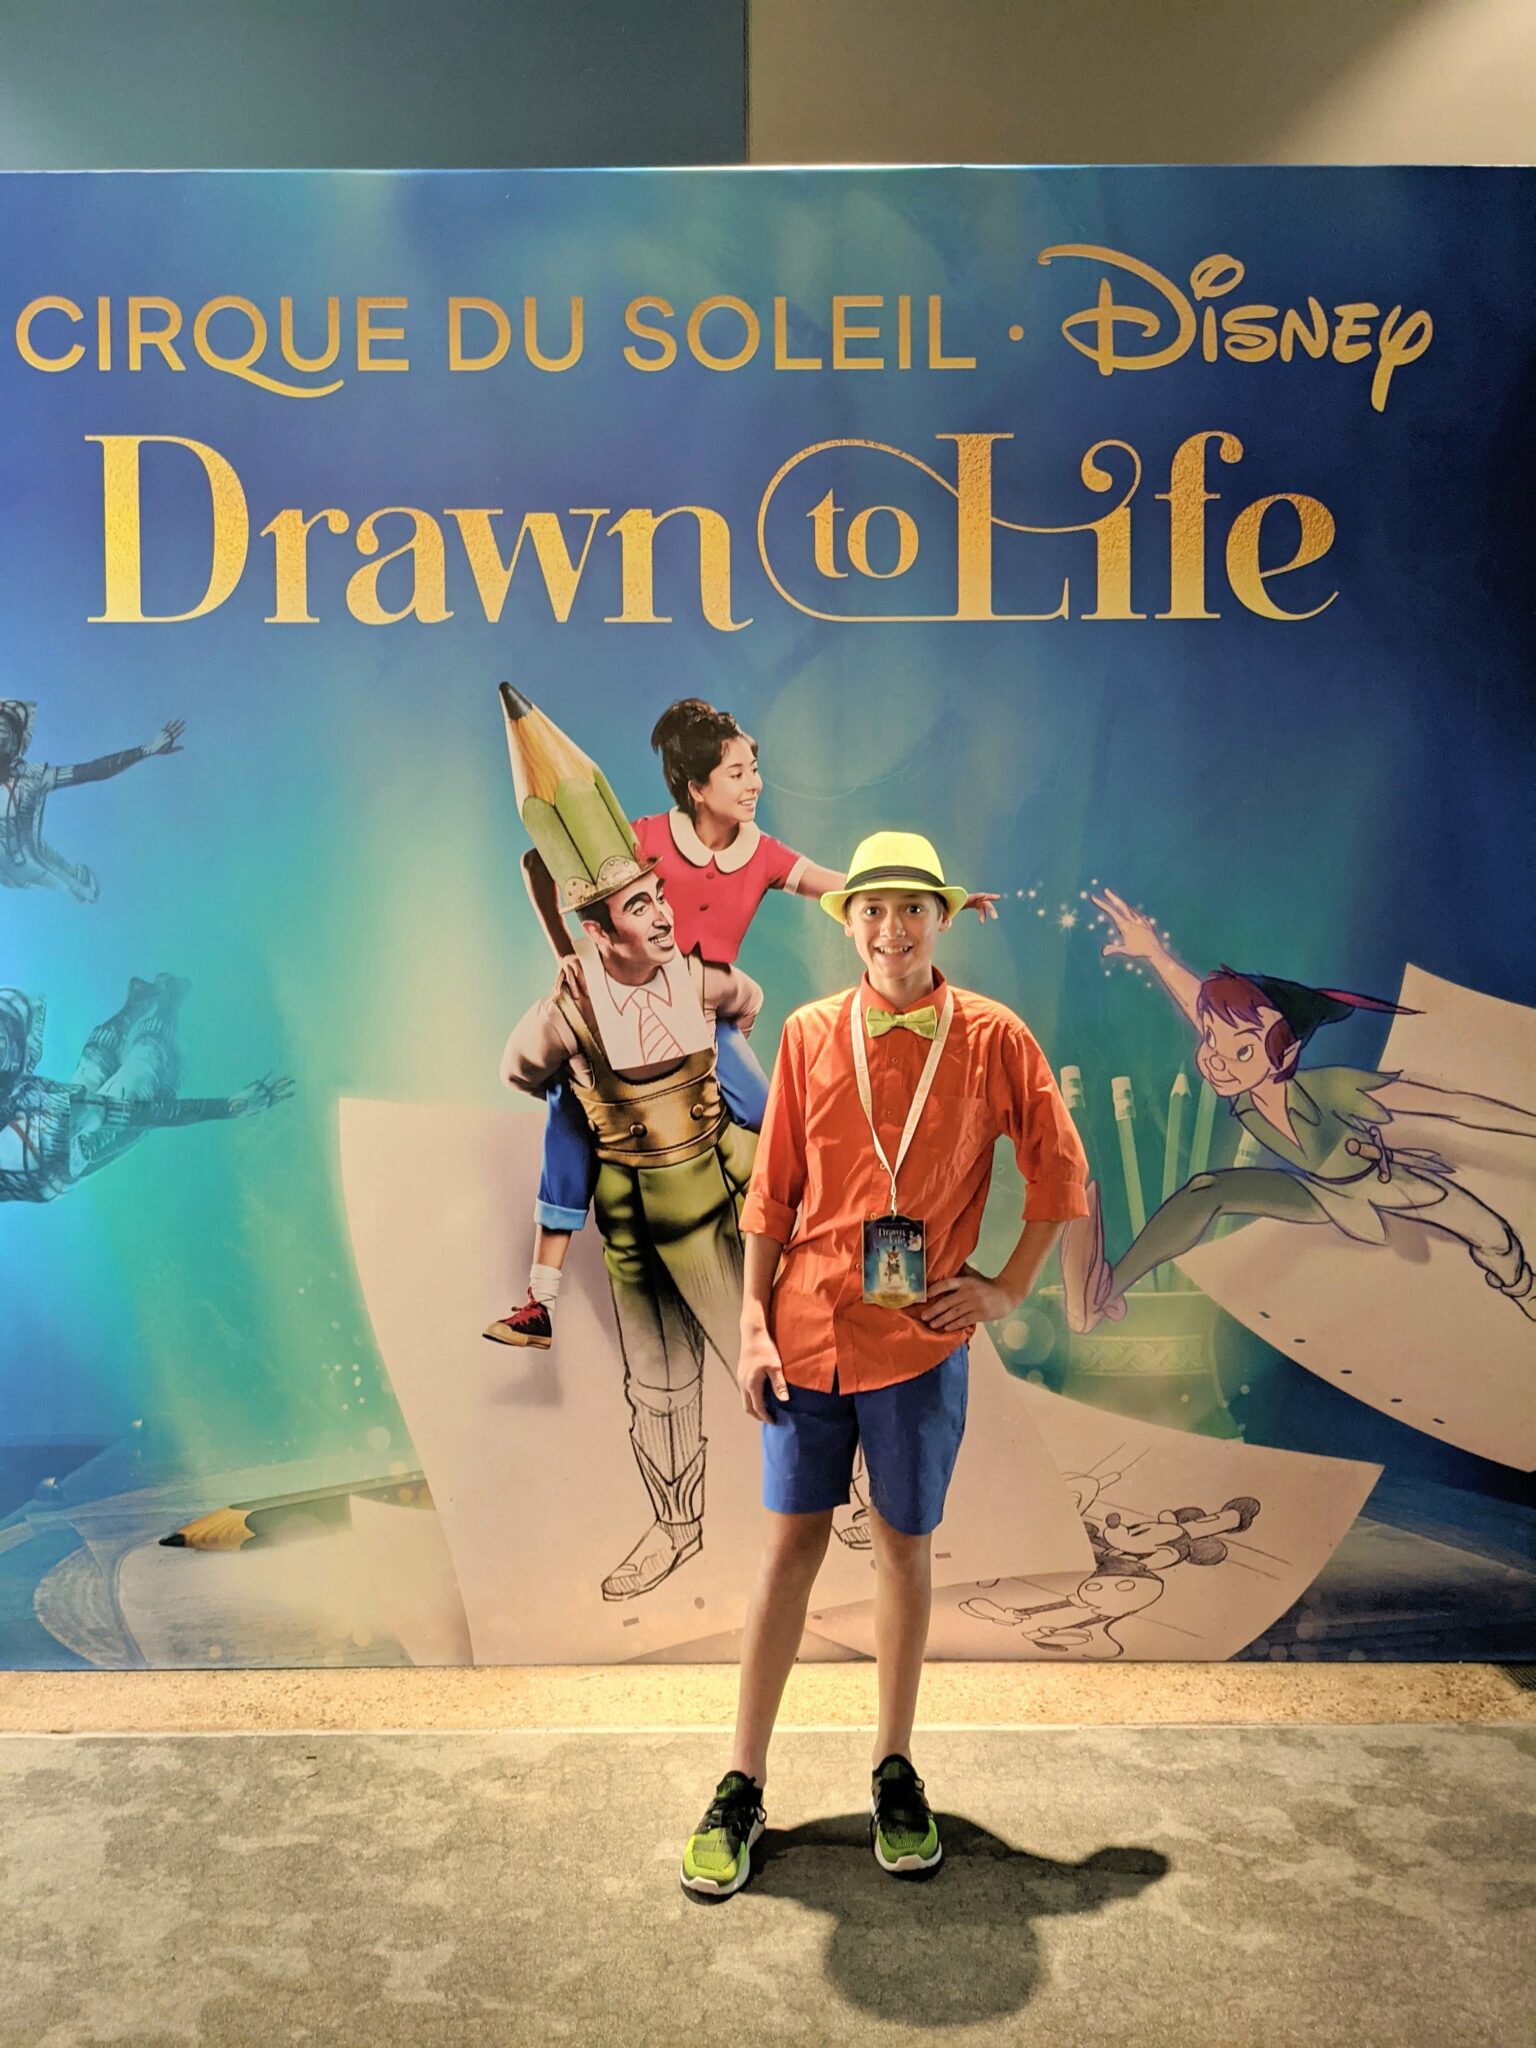 New! Cirque Du Soleil Show "Drawn to Life" Open at Disney Springs Orlando, Florida All Things with Purpose Sarah Lemp 13